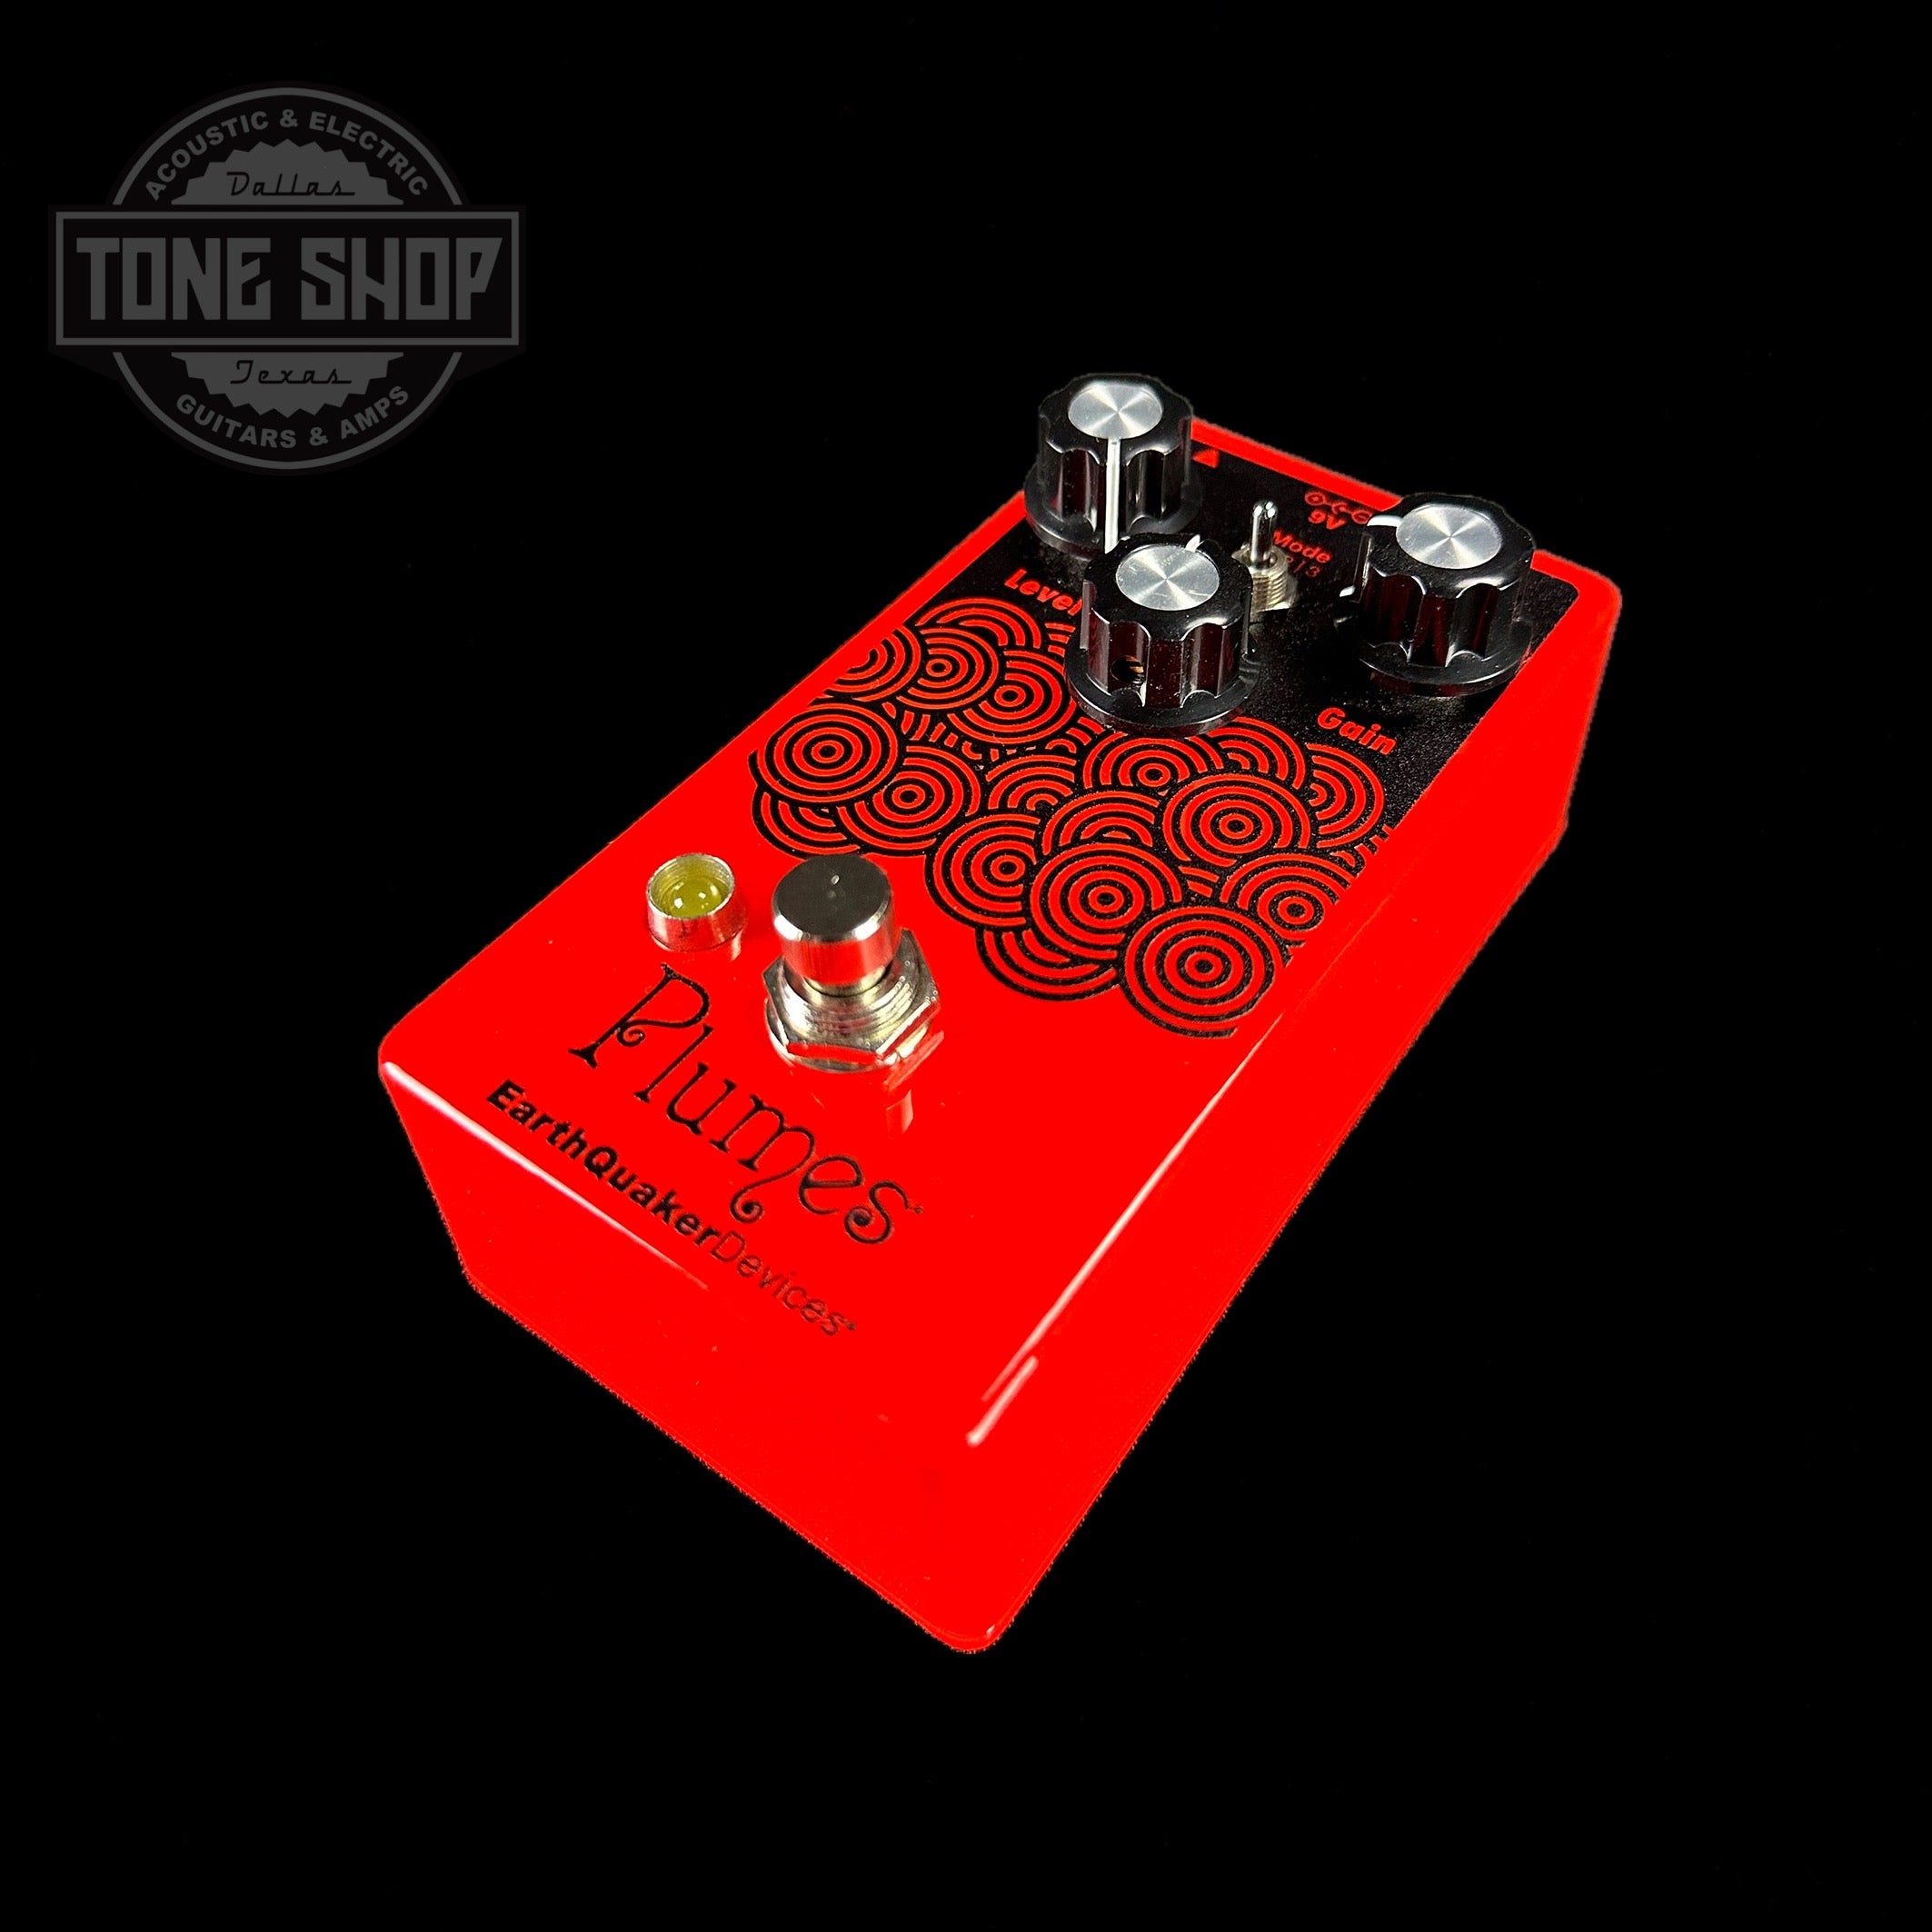 EarthQuaker Devices Plumes Tone Shop Custom Candy Apple Red – Tone 